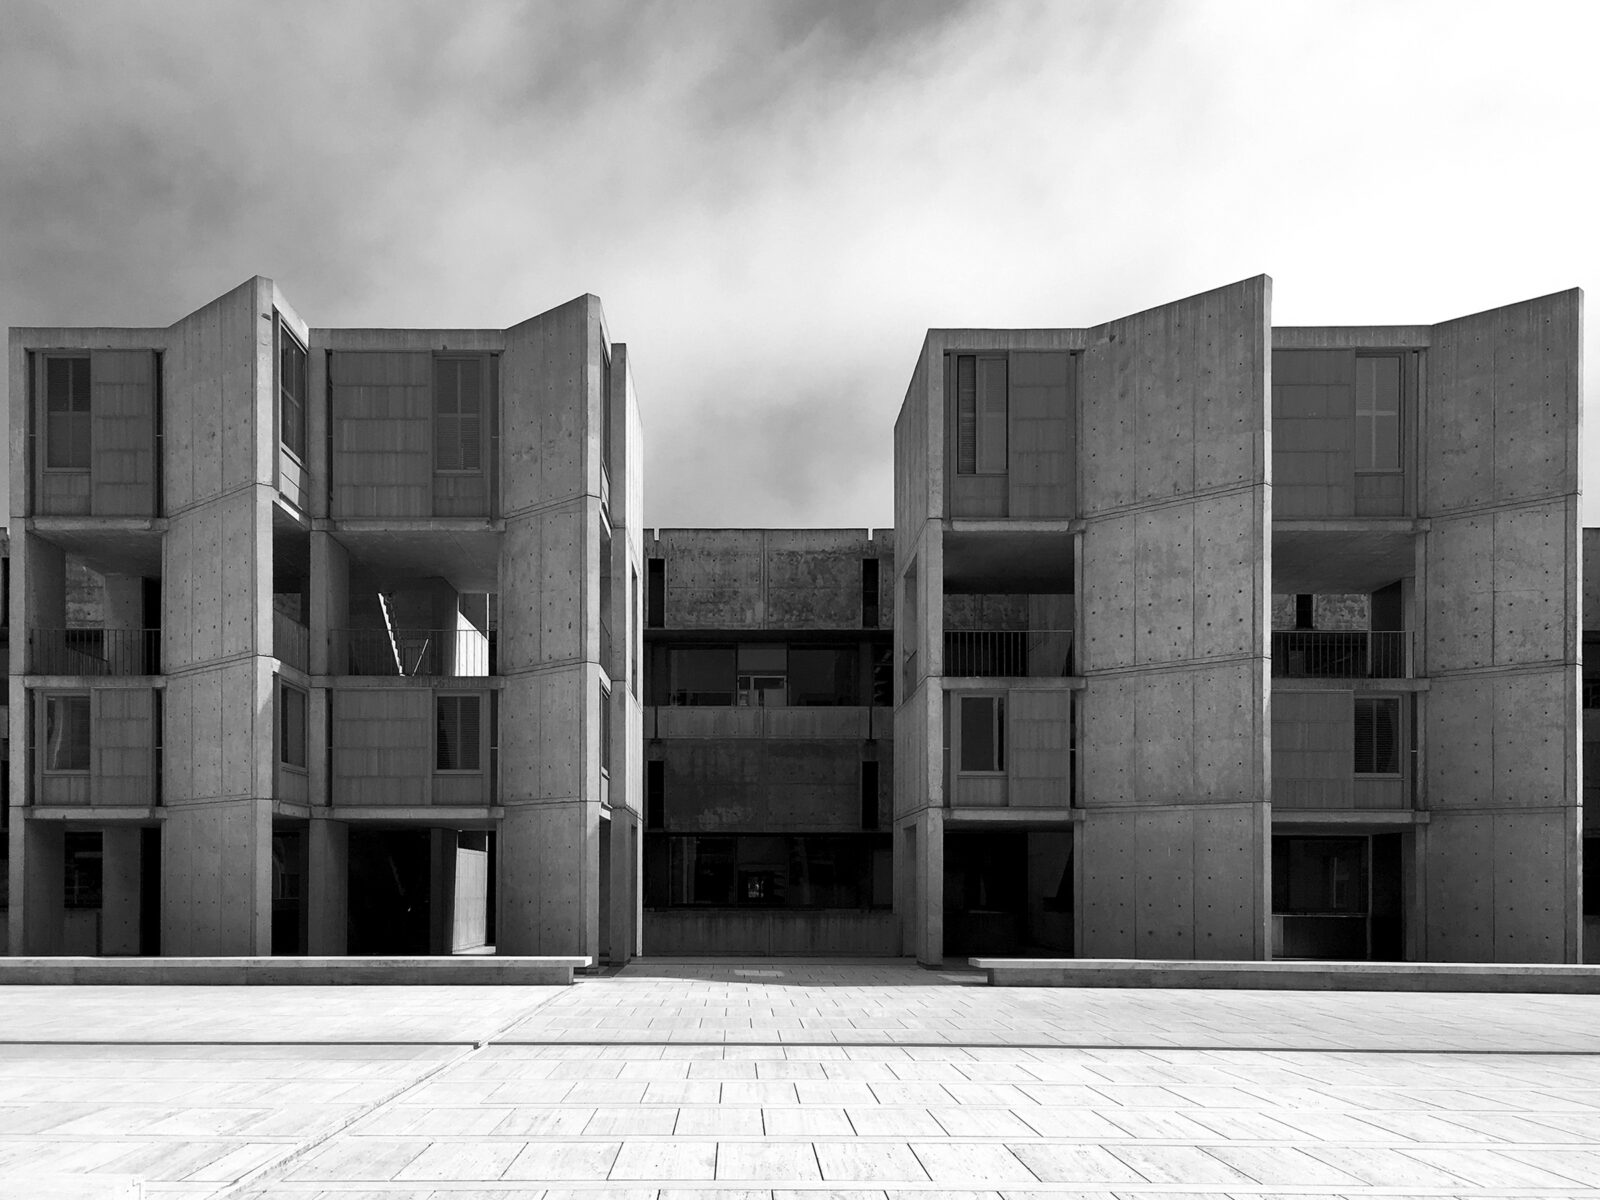 Facades of the studies rooms at the courtyard of the Salk Institute in La Jolla, California